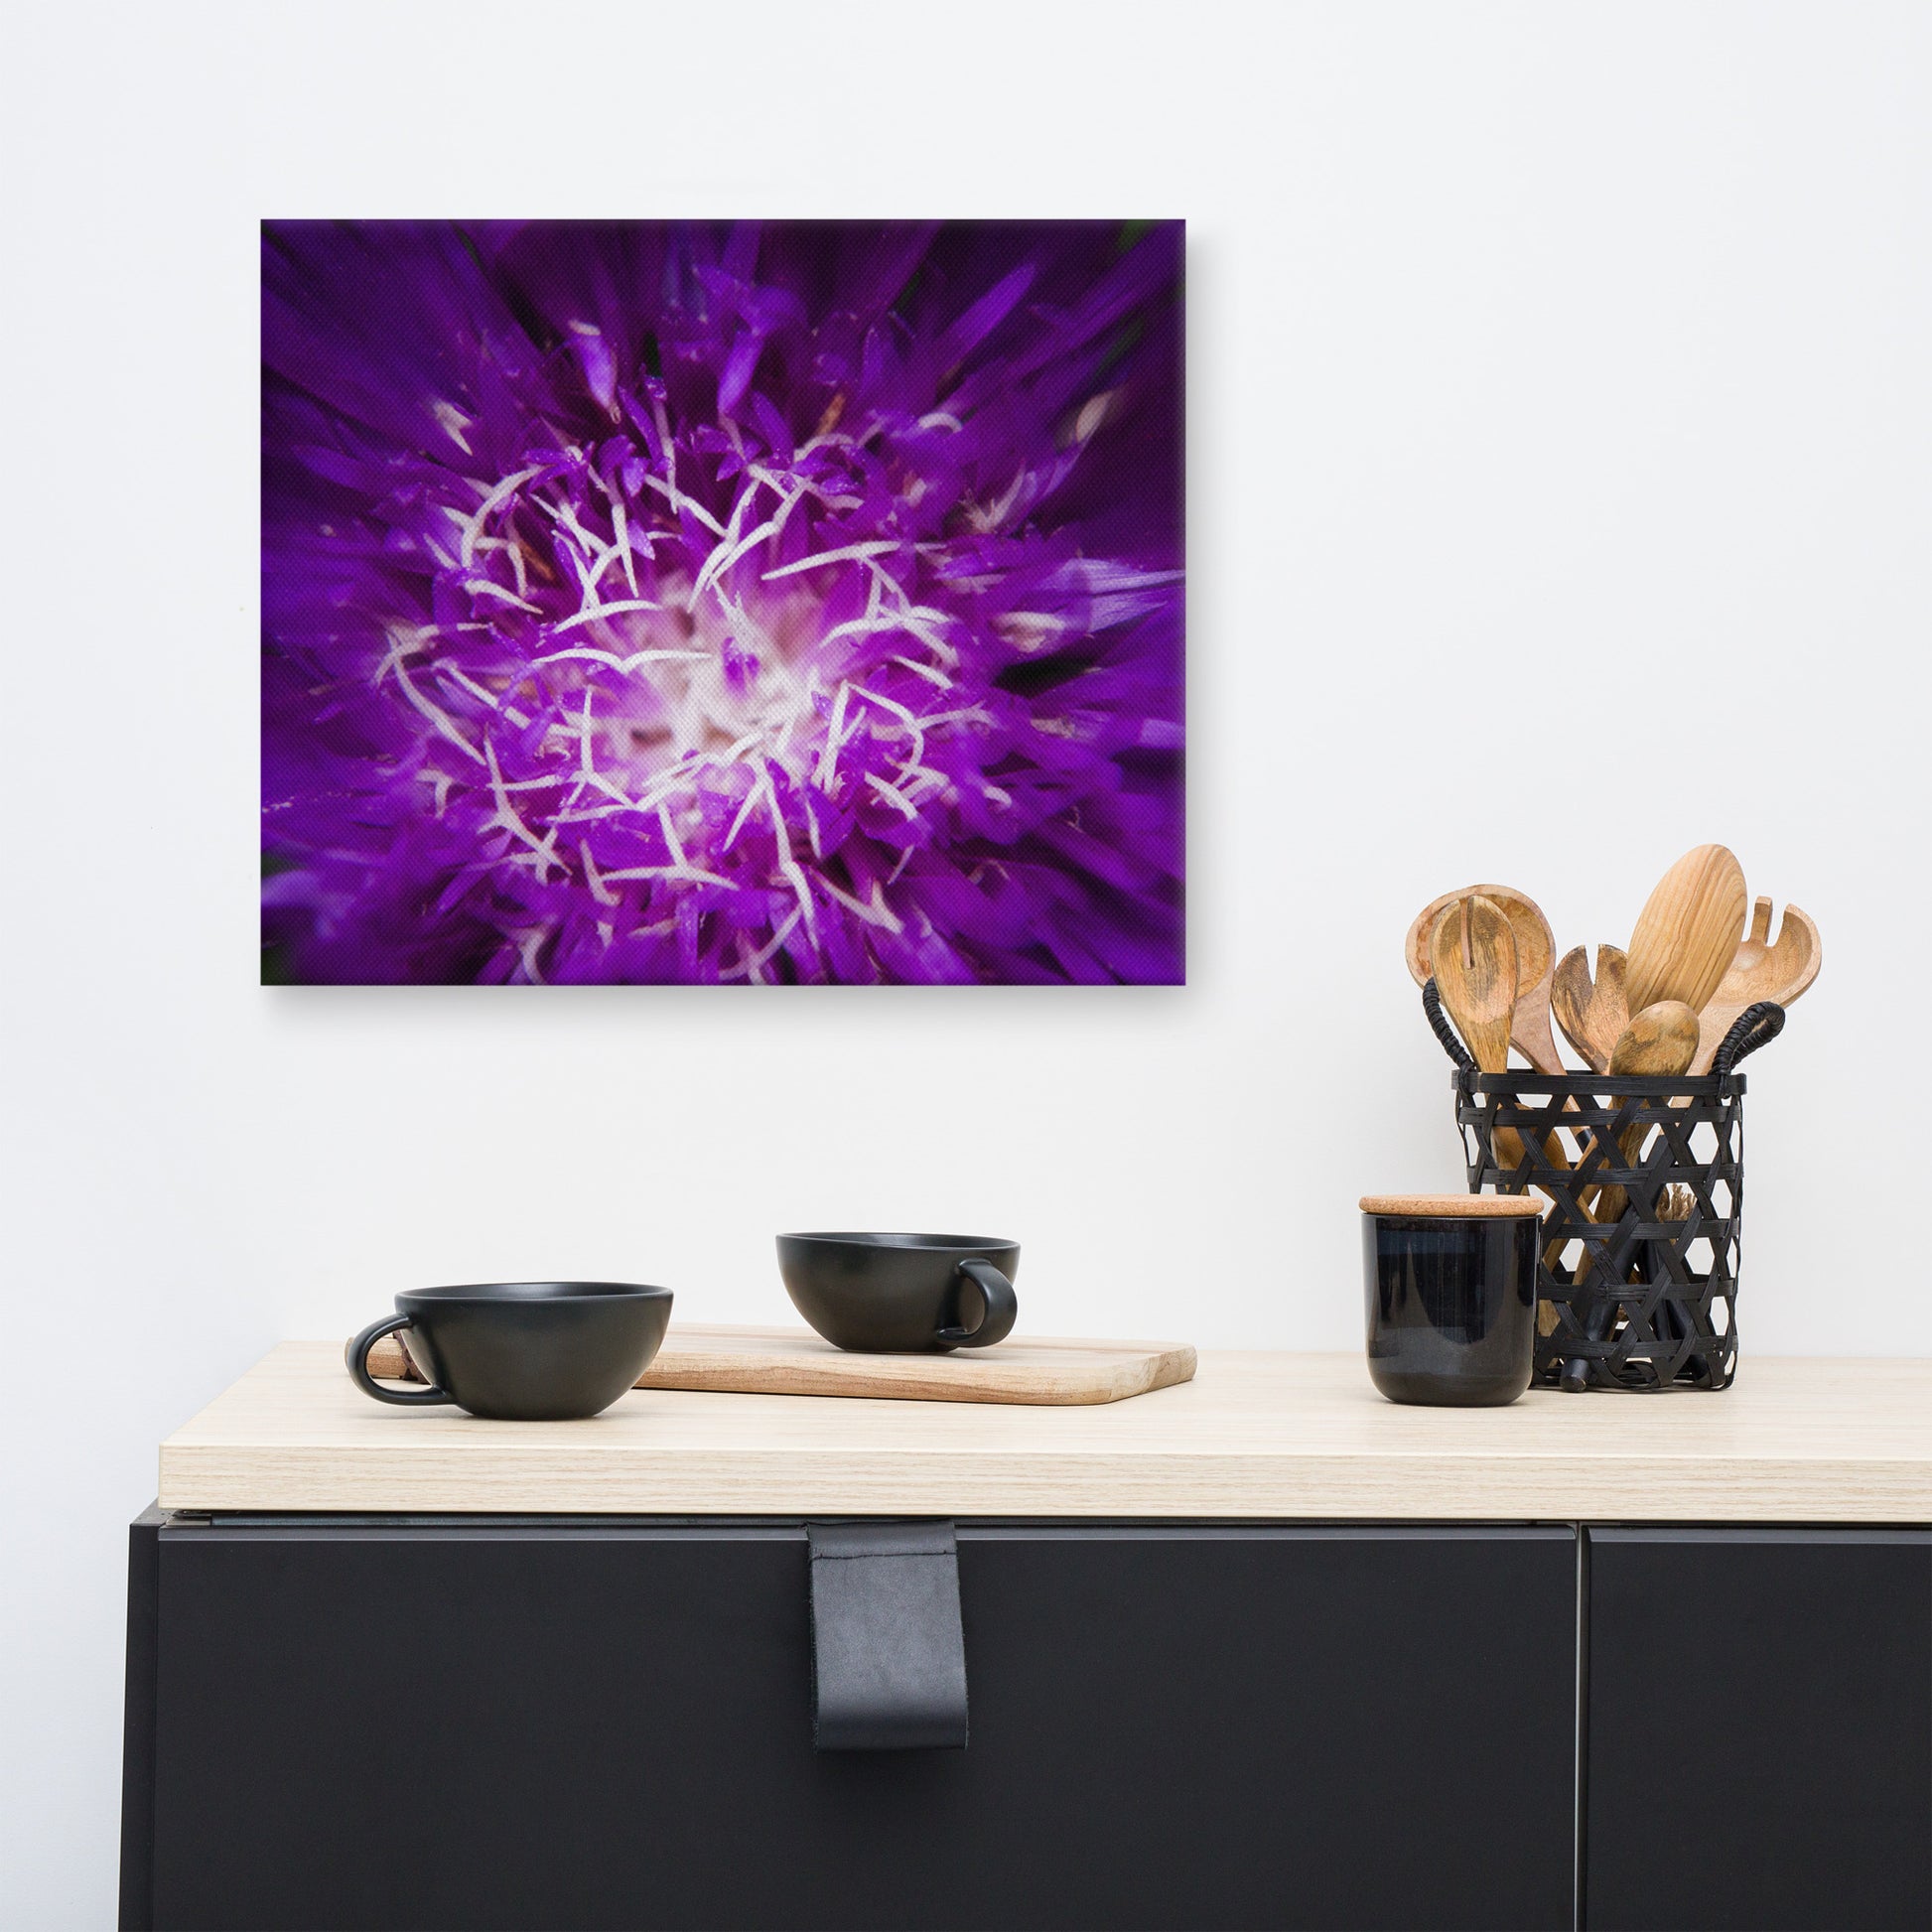 Art Behind Dining Table: Dark Purple and White Aster Bloom Close-up Botanical / Floral / Flora / Flowers / Nature Photograph Canvas Wall Art Print - Artwork